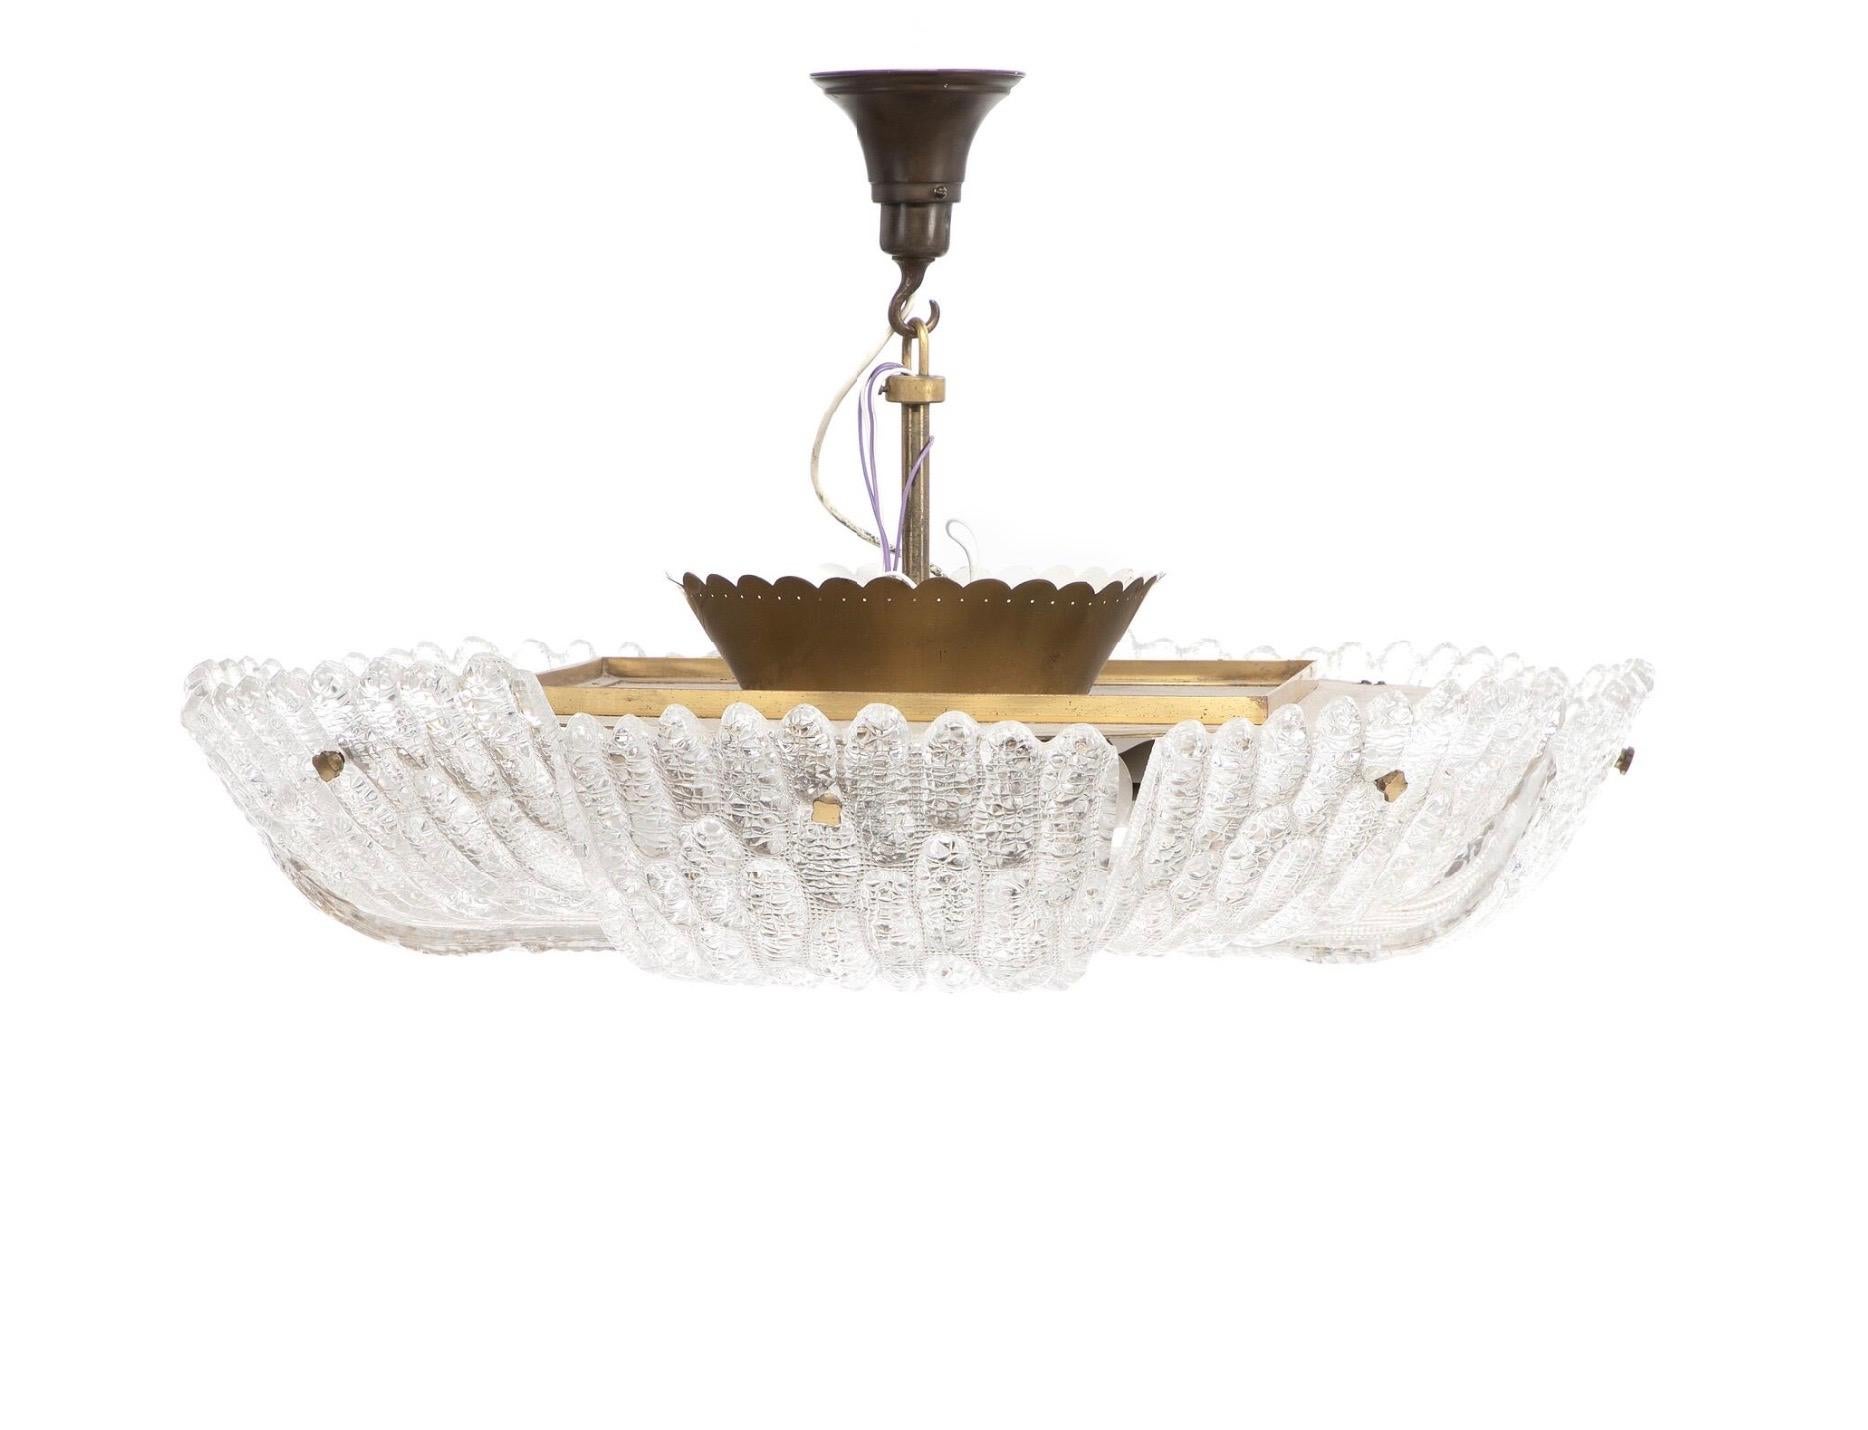 Orrefors chandelier 1950 Sweden.
Eight pie shaped crocodile pattern glass slices together make up the diffuser with a large flat round brass piece in the center that supports the glass each glass is held in place with a single brass finial.

This is